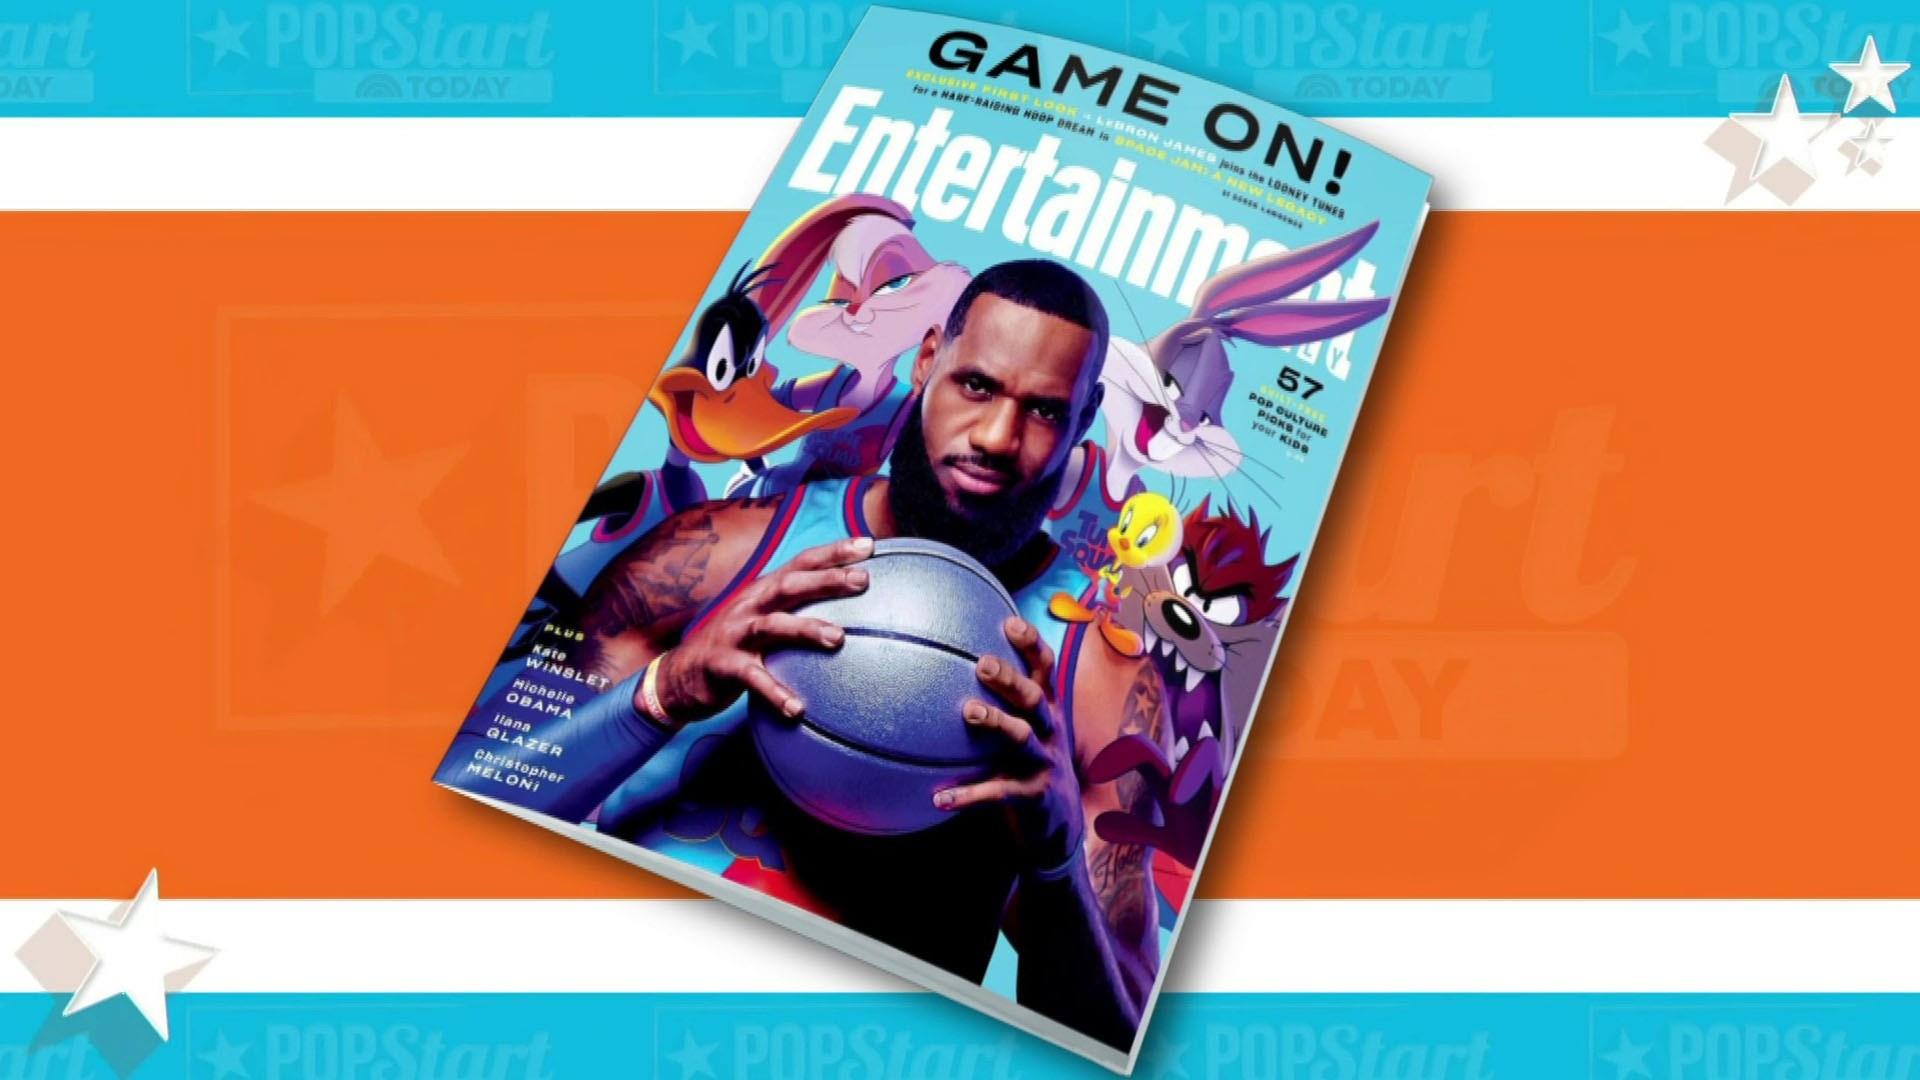 LeBron James confirms 'Space Jam 2' title and shares new logo